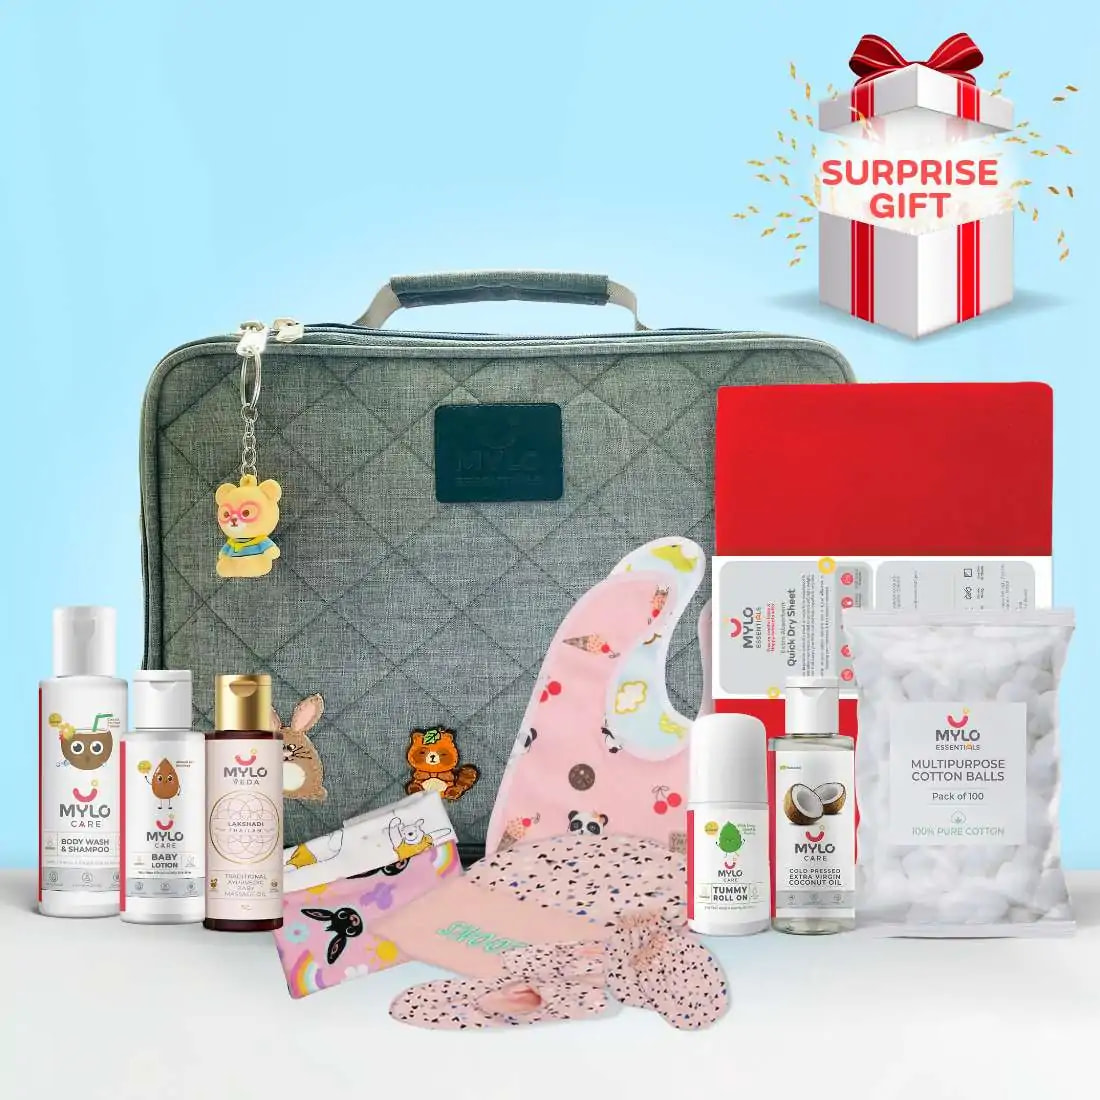 New Baby Complete Care Gift Set - Mini Baby Suitcase Worth Rs 999/- Free & A Surprise Gift